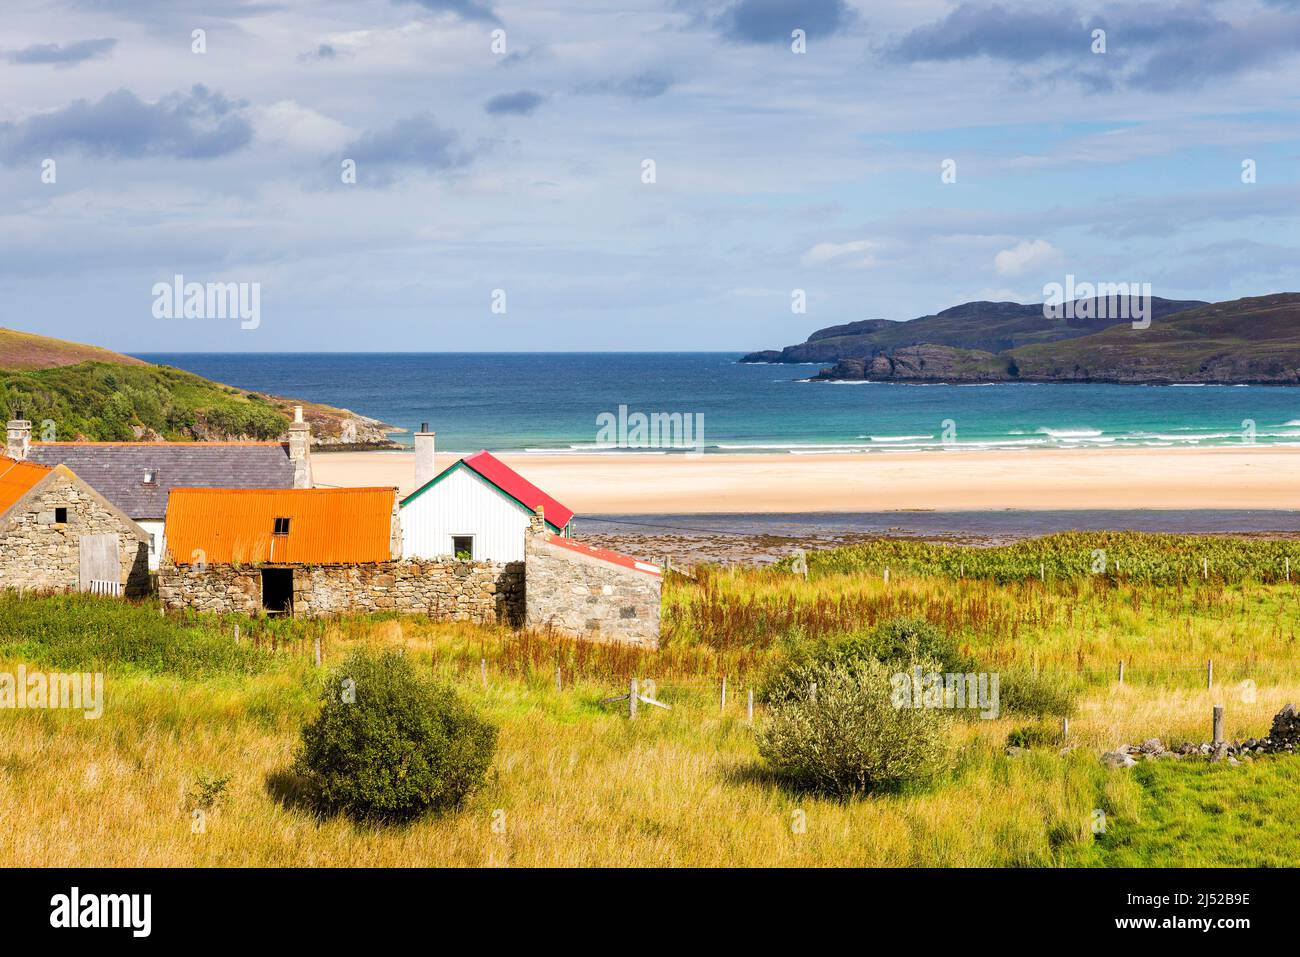 A small cluster of old farm buildings overlook a large, deserted, sandy beach and brilliant turquoise sea at Torrisdale Bay, on a sunny day. Stock Photo